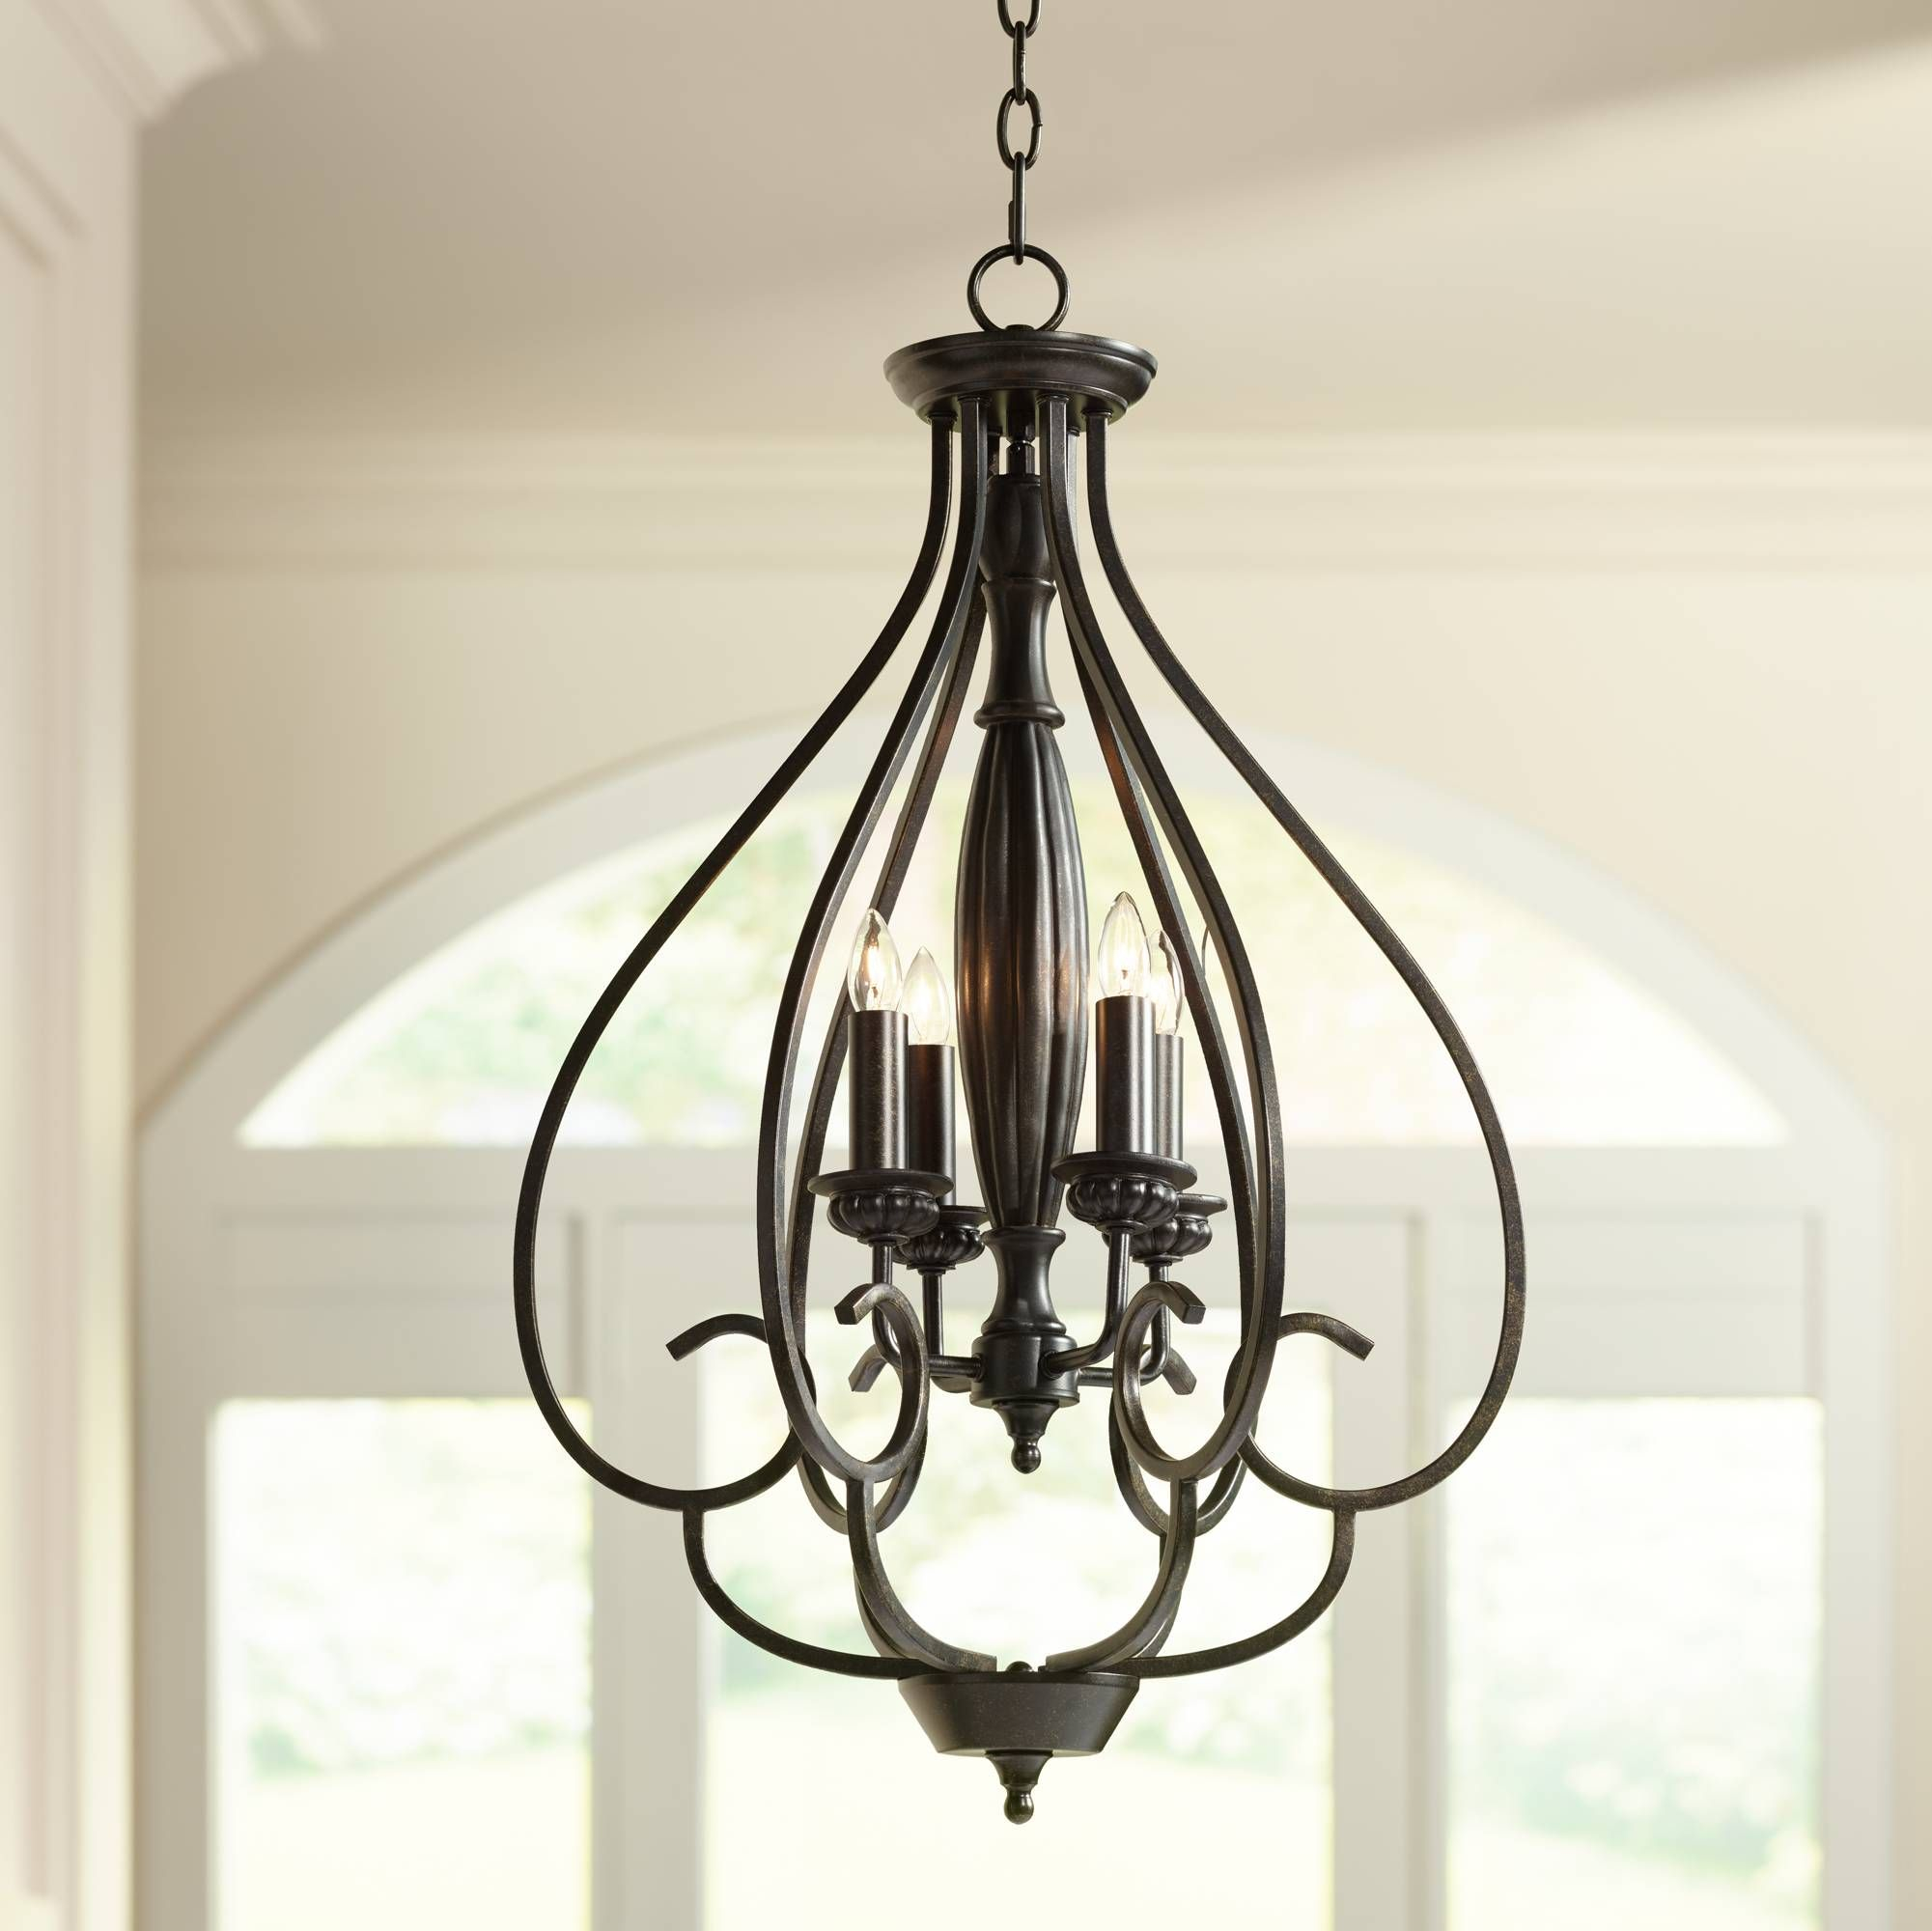 Dunnell 18 34 Wide Bronze Foyer Chandelier Lighting in sizing 2001 X 2000